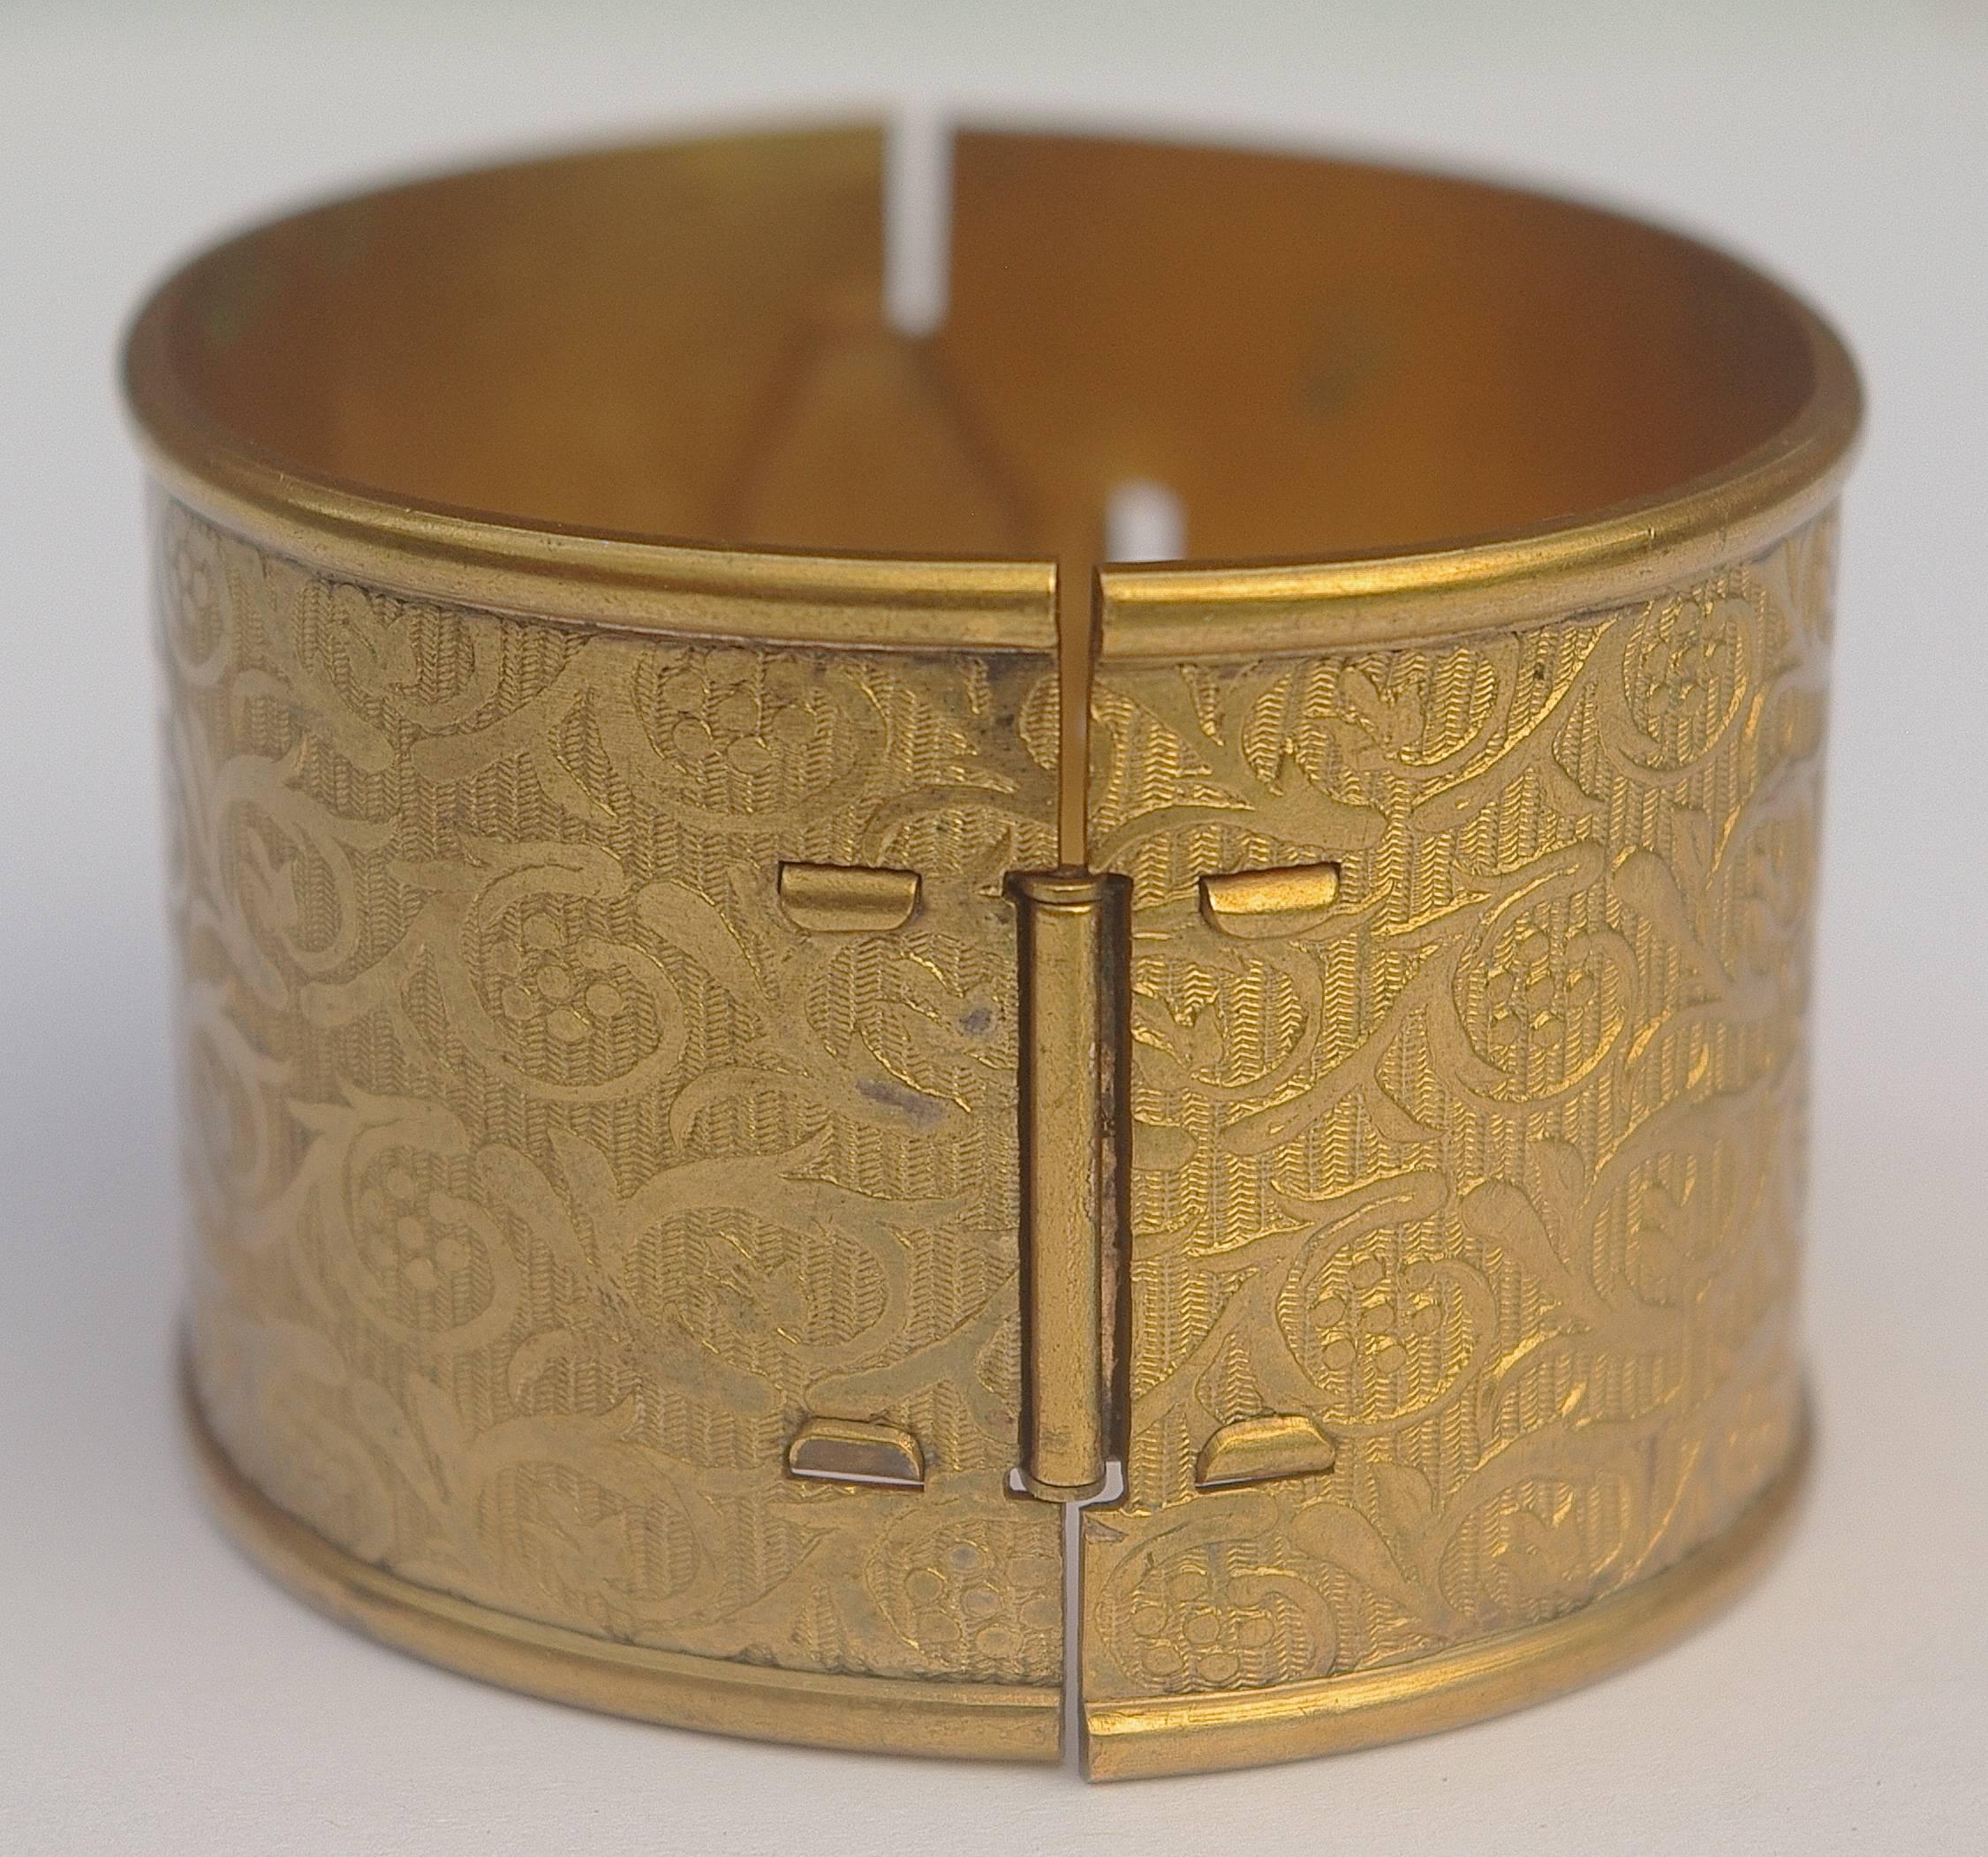 Original early twentieth century oval shape wide gold tone bangle bracelet, featuring a wonderful floral design. Width 3.5cm / 1.38 inches, and inner circumference 17.5cm / 6.89 inches. There are signs of age to the inside band, the outside is in